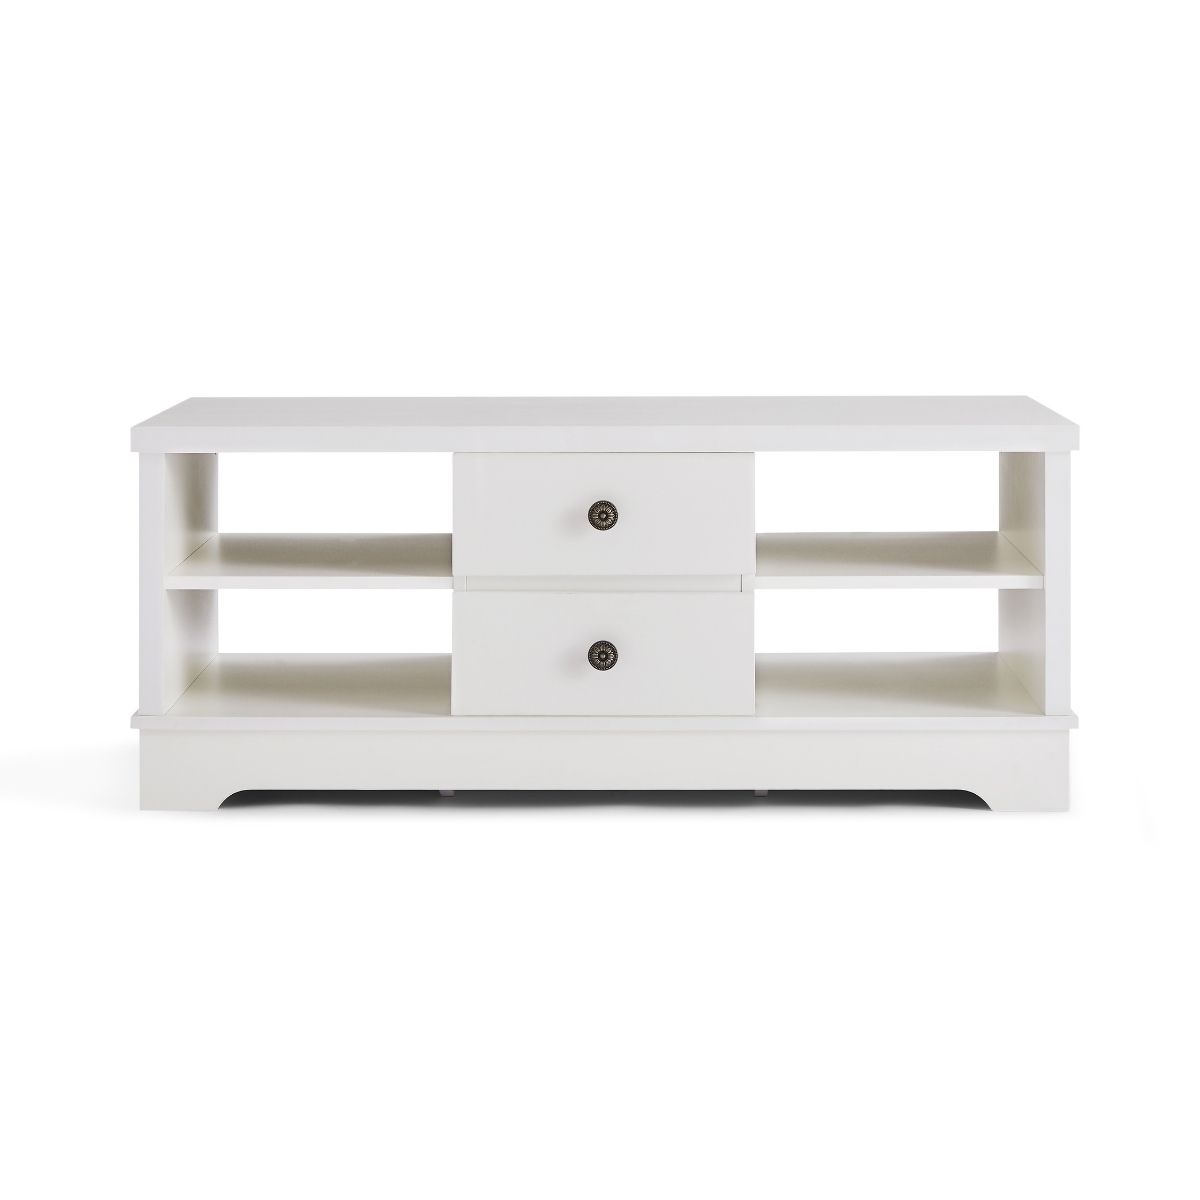 Iskra Coffee Table Coastal Style with Drawers - White